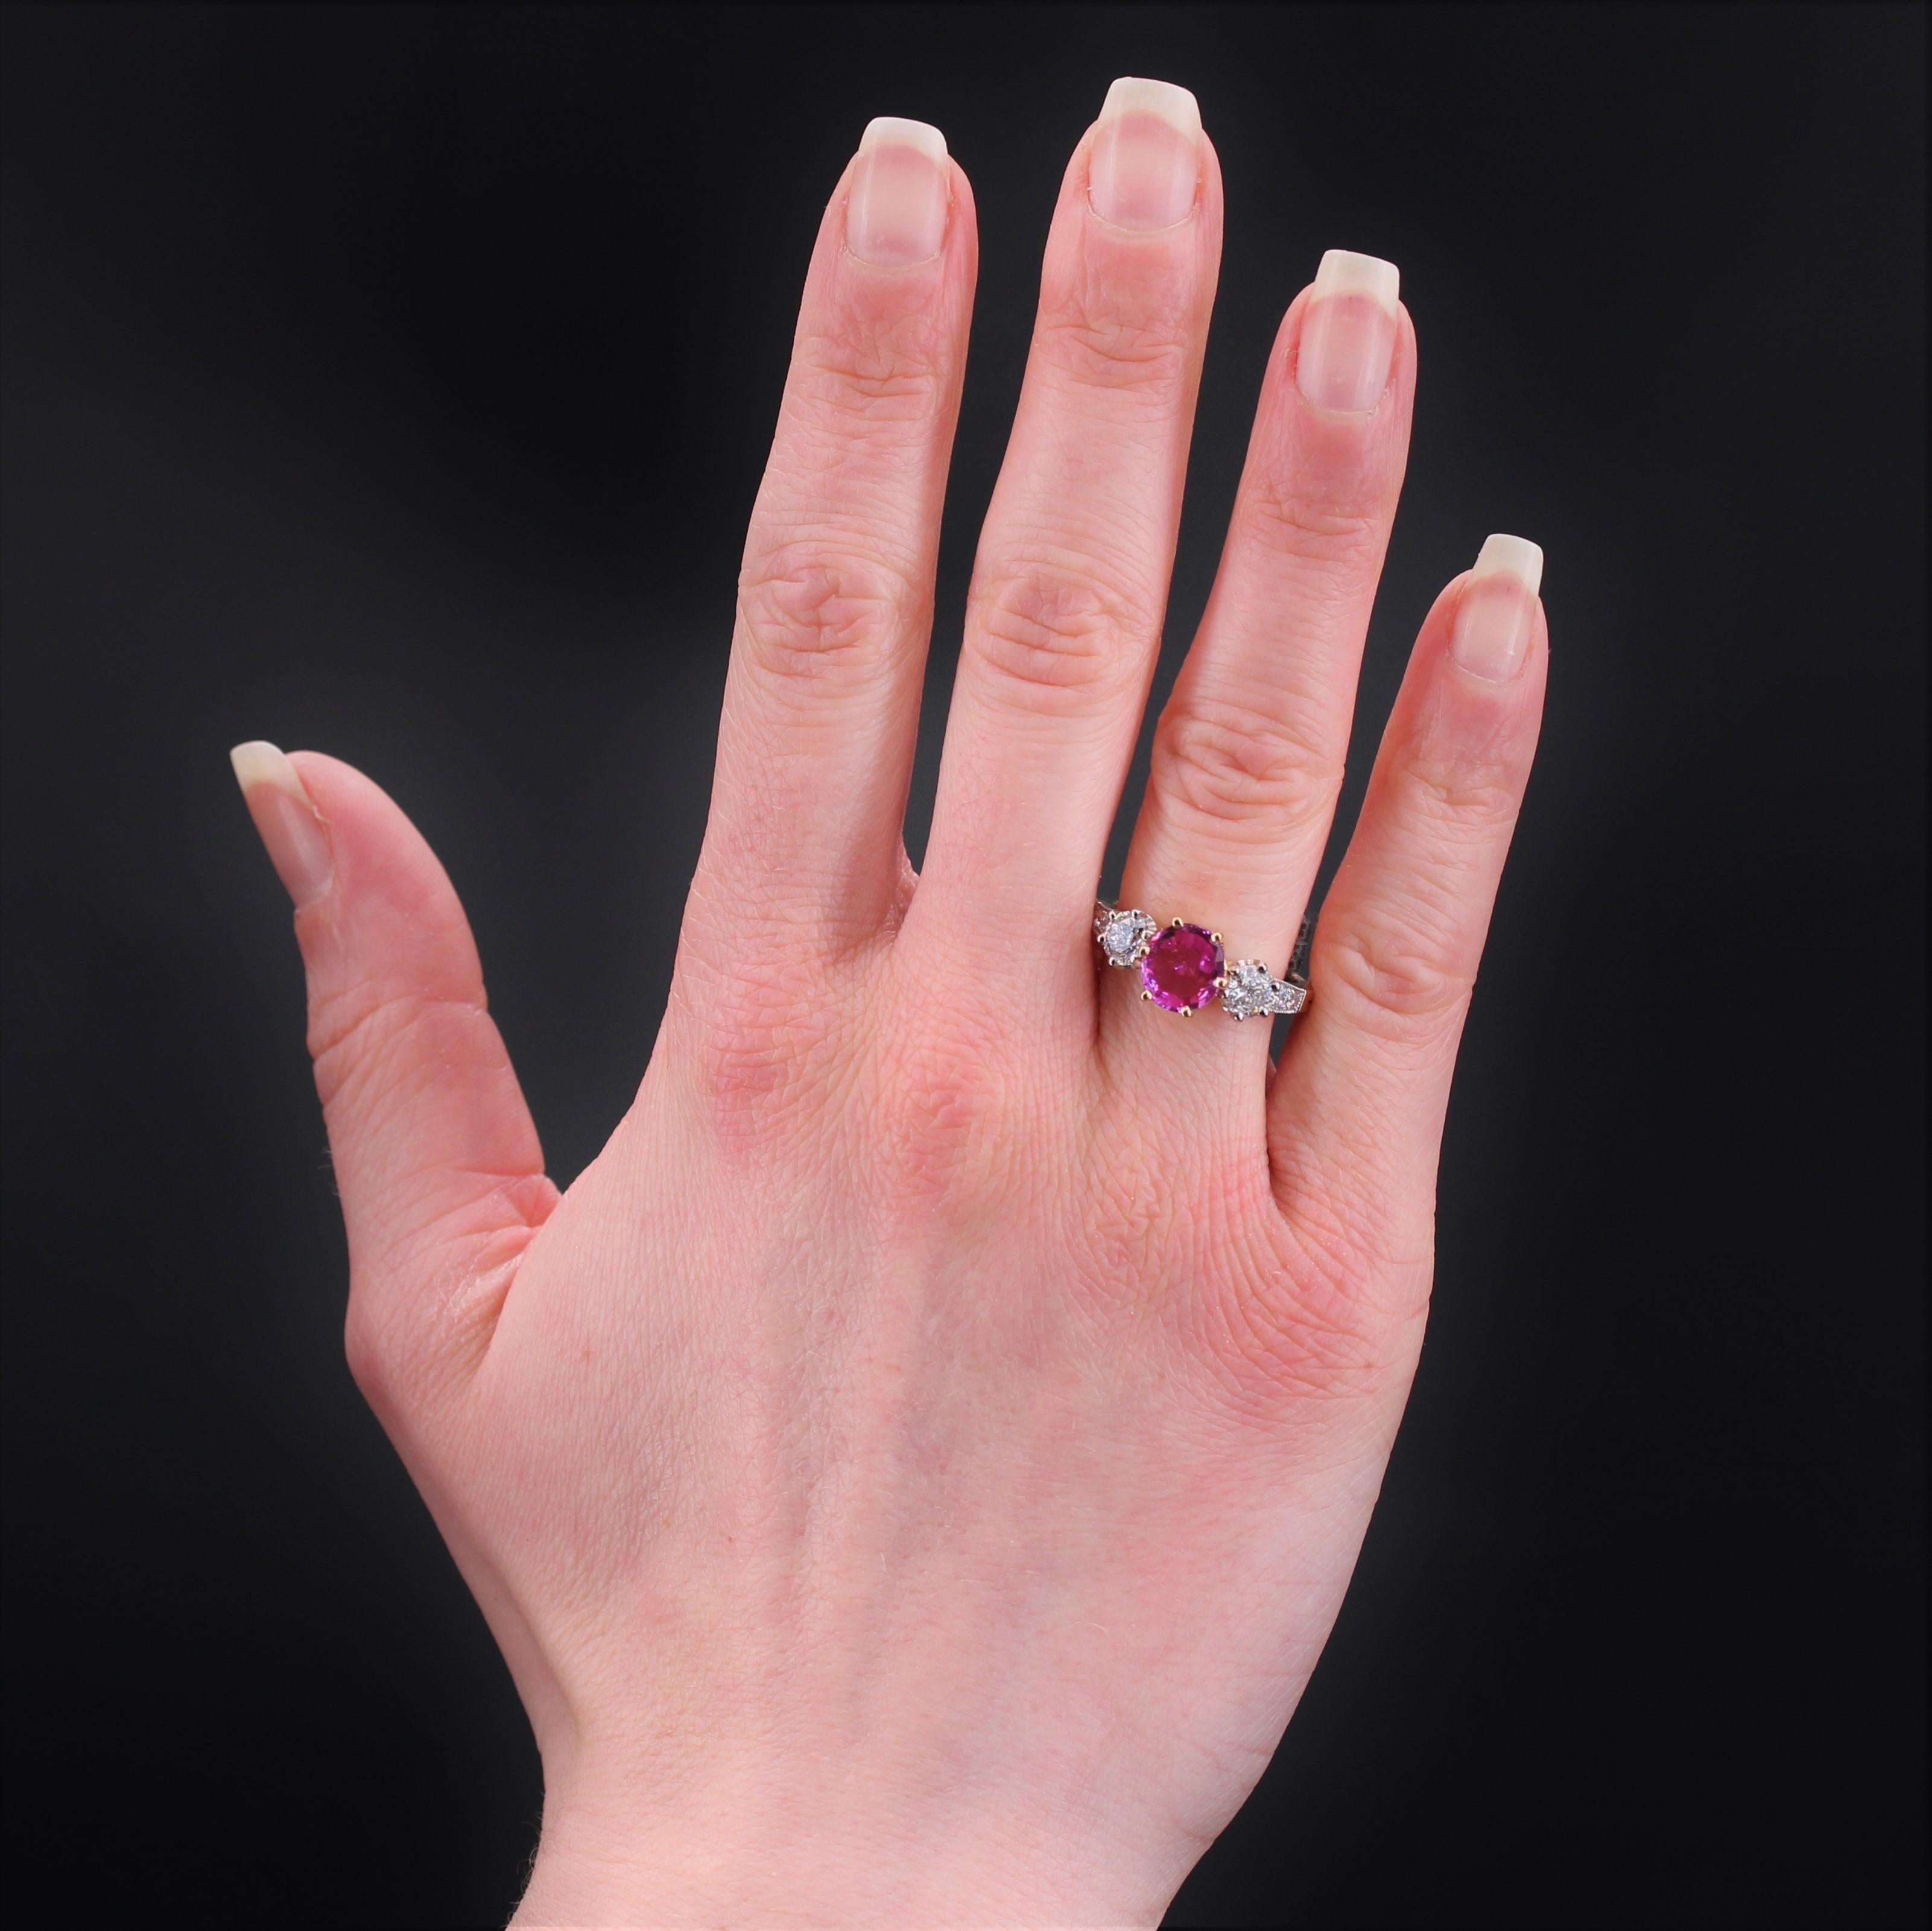 Ring in 18 karat yellow gold, eagle head hallmark and platinum, dog head hallmark.
Superb sapphire ring, it is set on its top with a pink sapphire with 6 claws supported by 2 modern brilliant- cut diamonds. On the start of the ring, on both sides